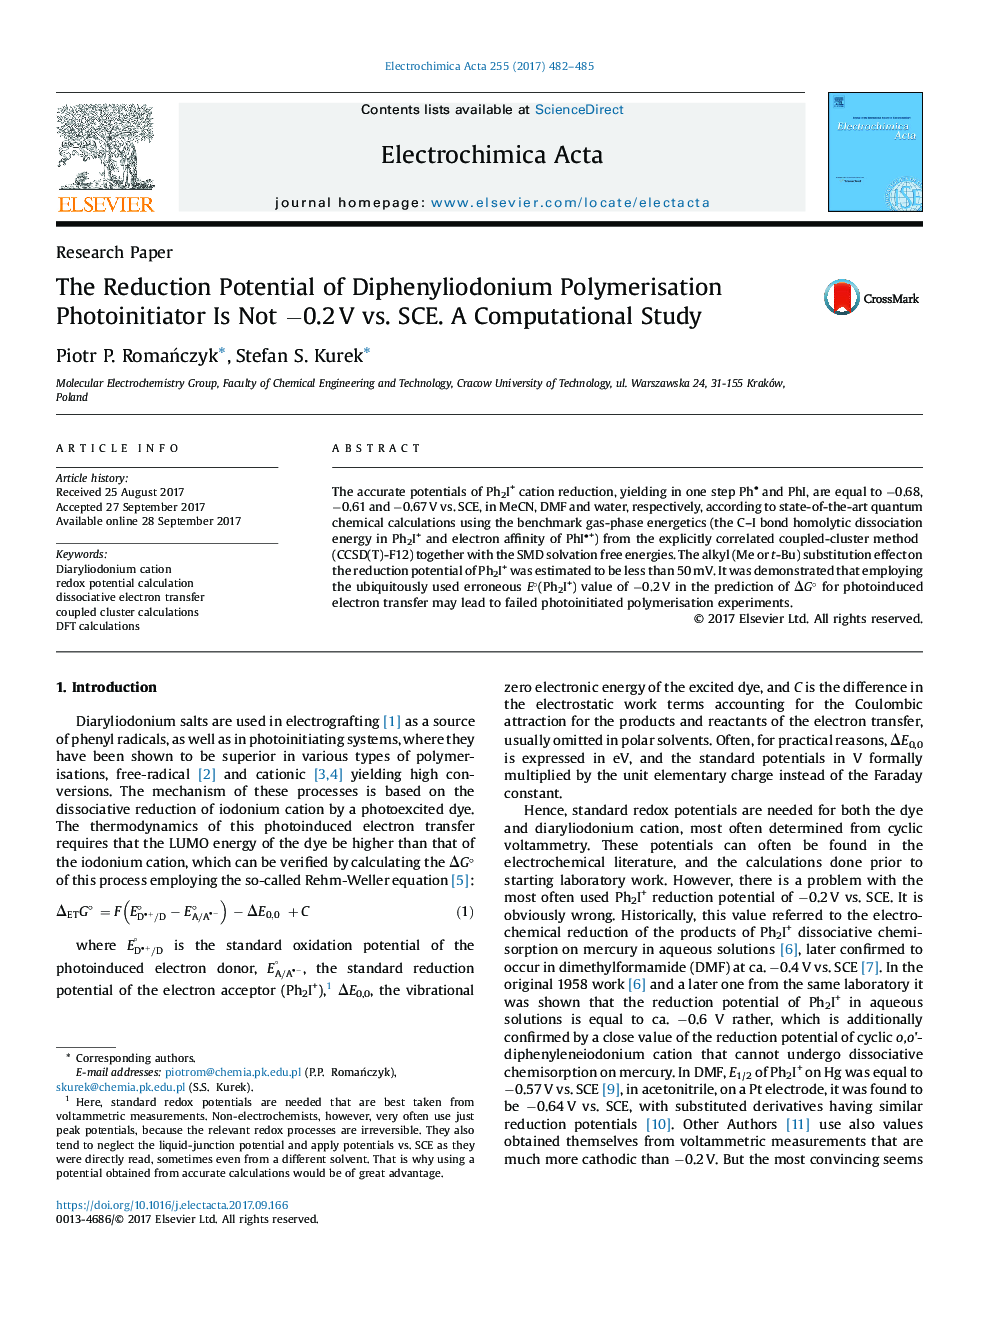 The Reduction Potential of Diphenyliodonium Polymerisation Photoinitiator Is Not â0.2Â V vs. SCE. A Computational Study